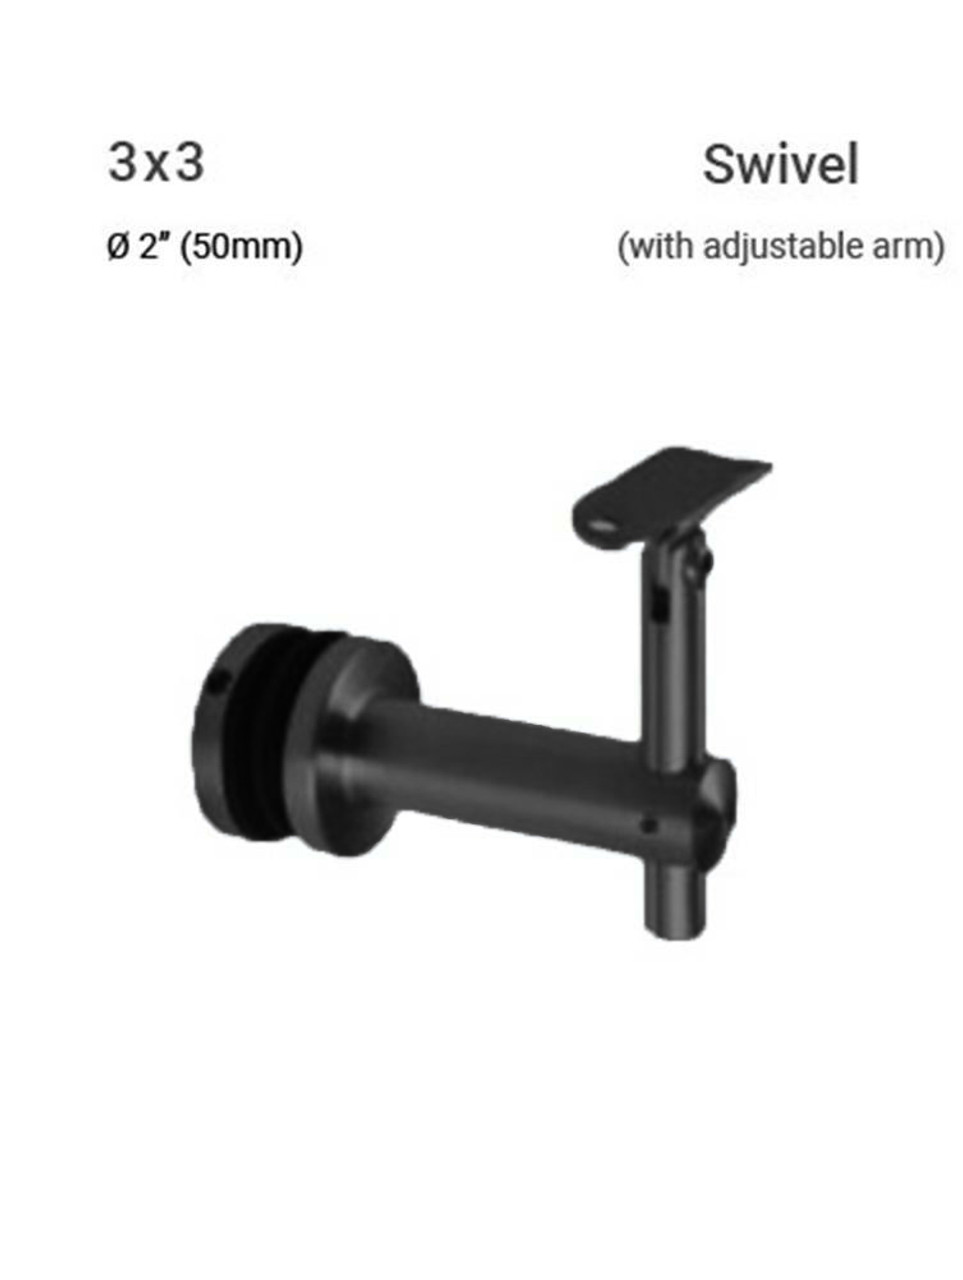 GB46033350SBLA | GLASS MOUNTED HAND RAIL BRACKET 3" X 3" SWIVEL TYPE (with adjustable arm) 50MM PLATE DIA IN MATTE BLACK FINISH